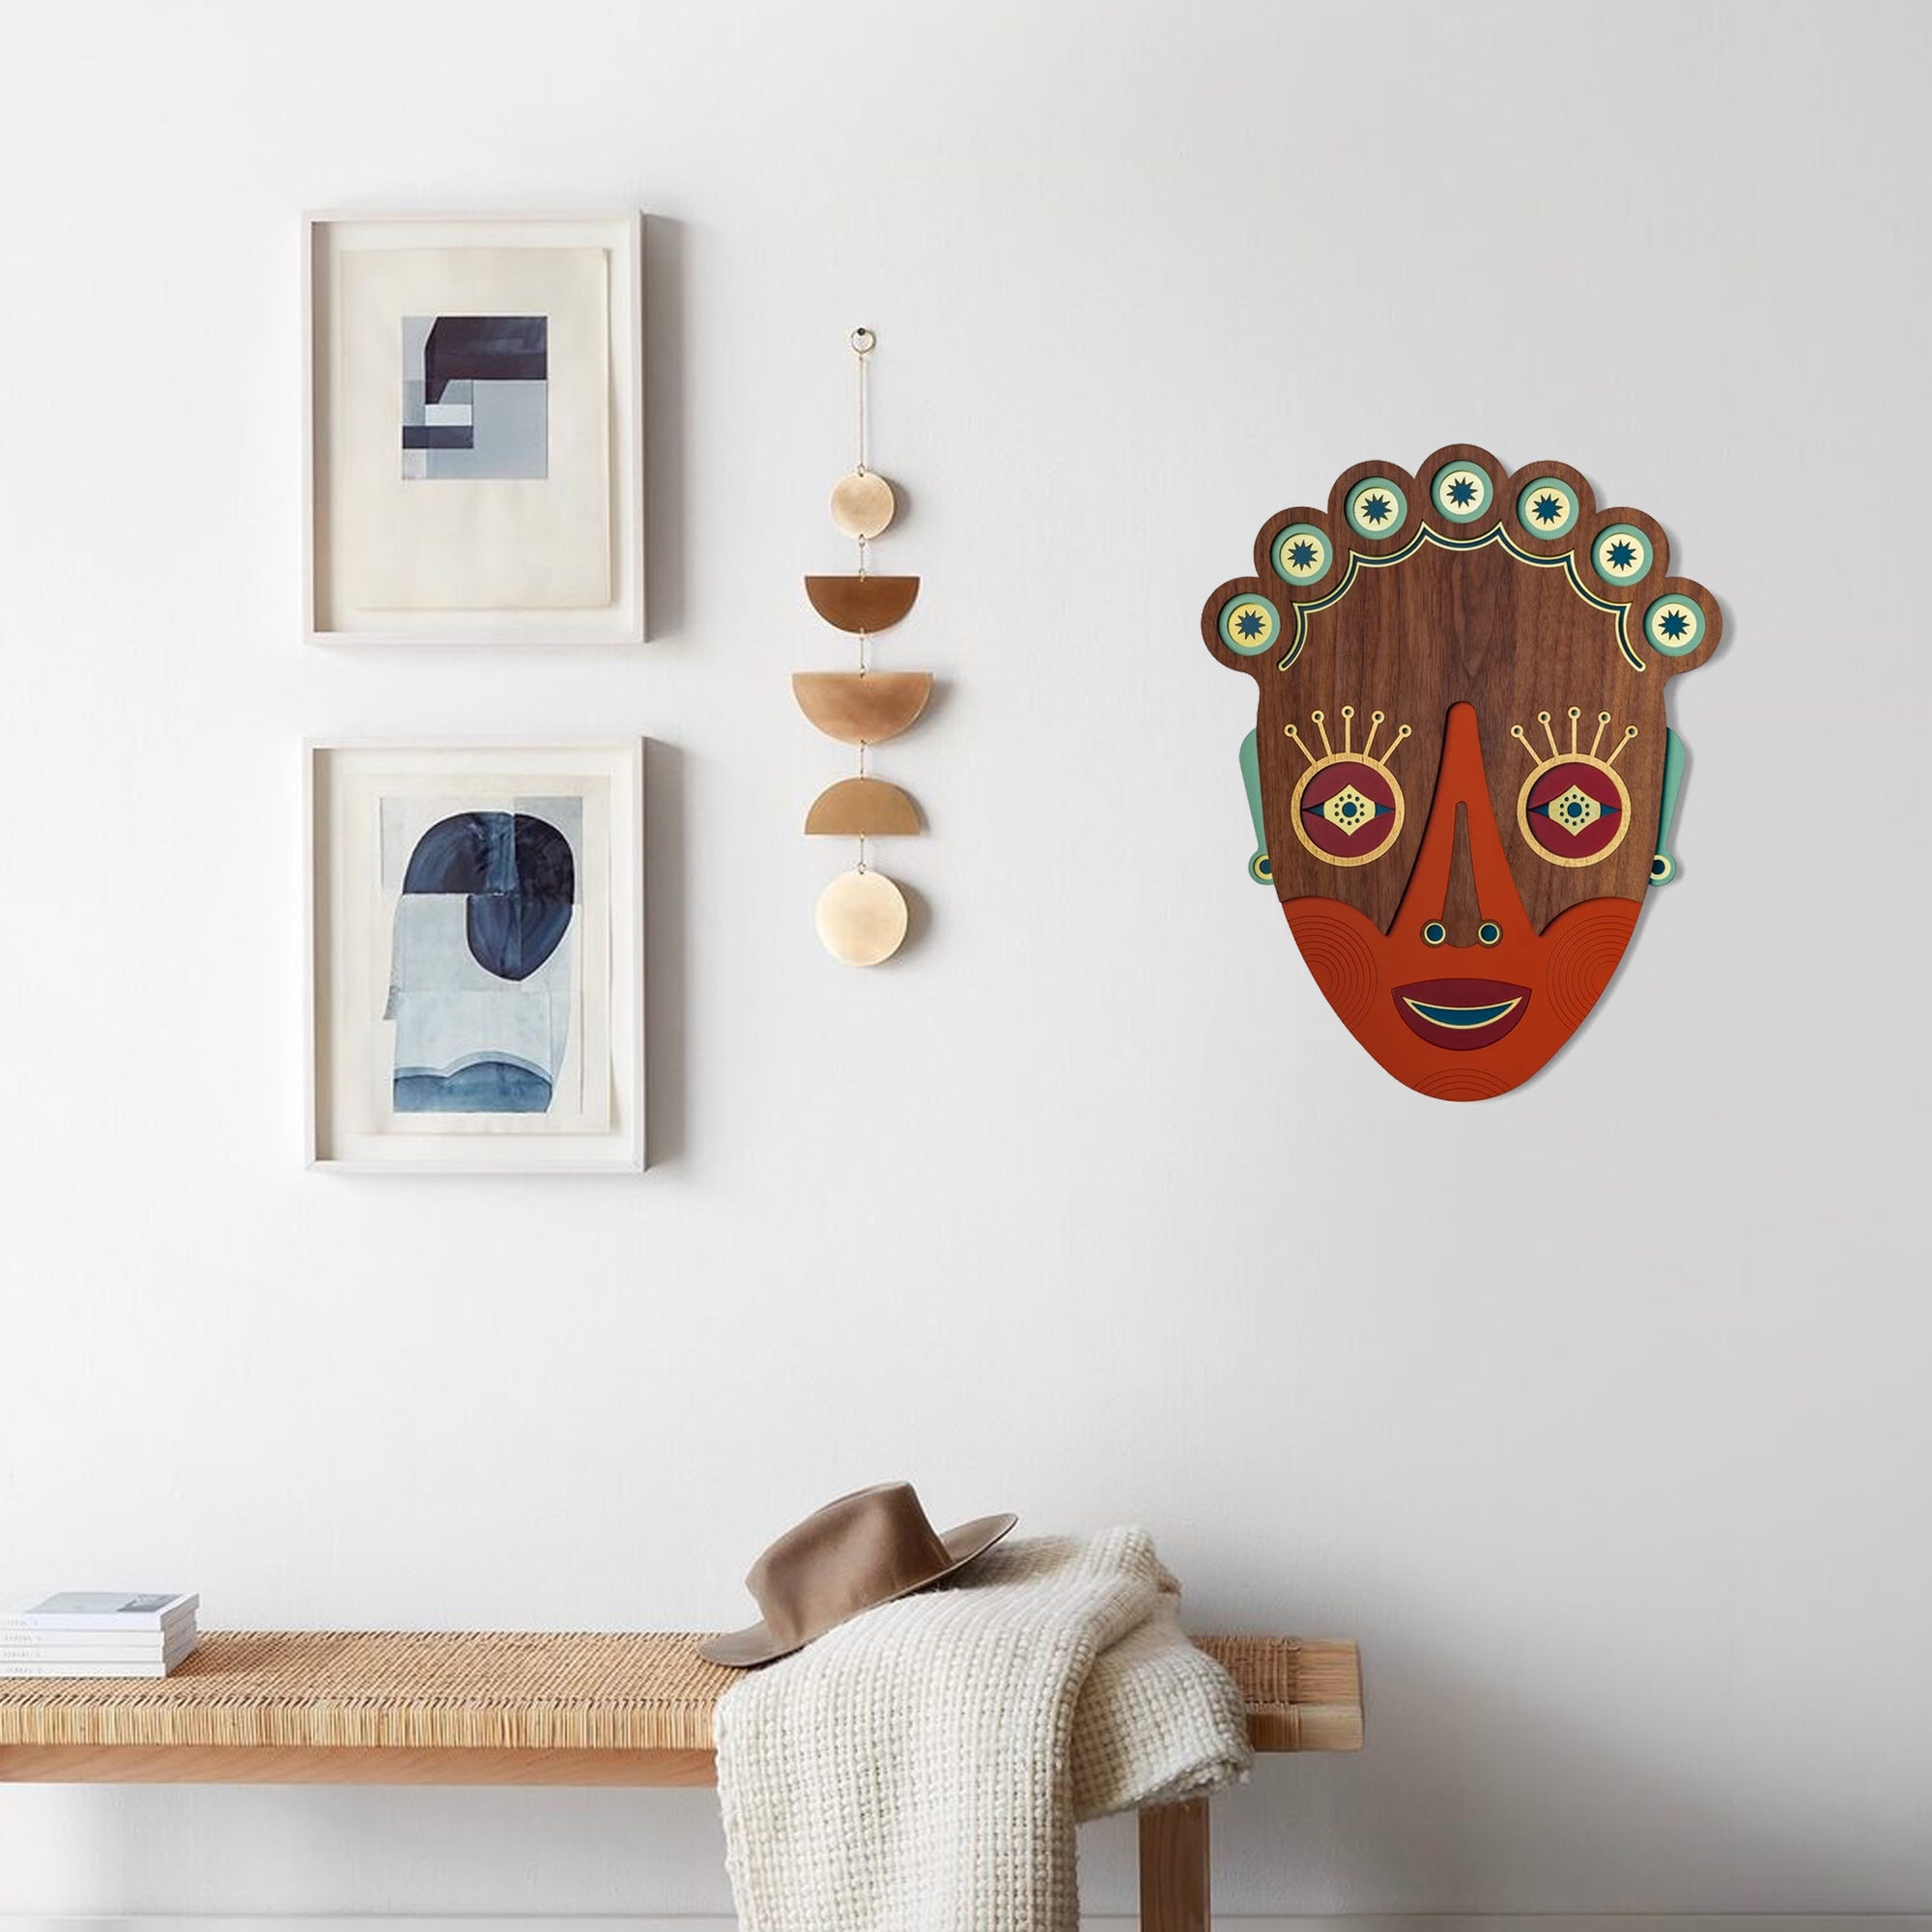 Abstract Cultural Wood Wall Art with Boho Chic & African Decor Patterns